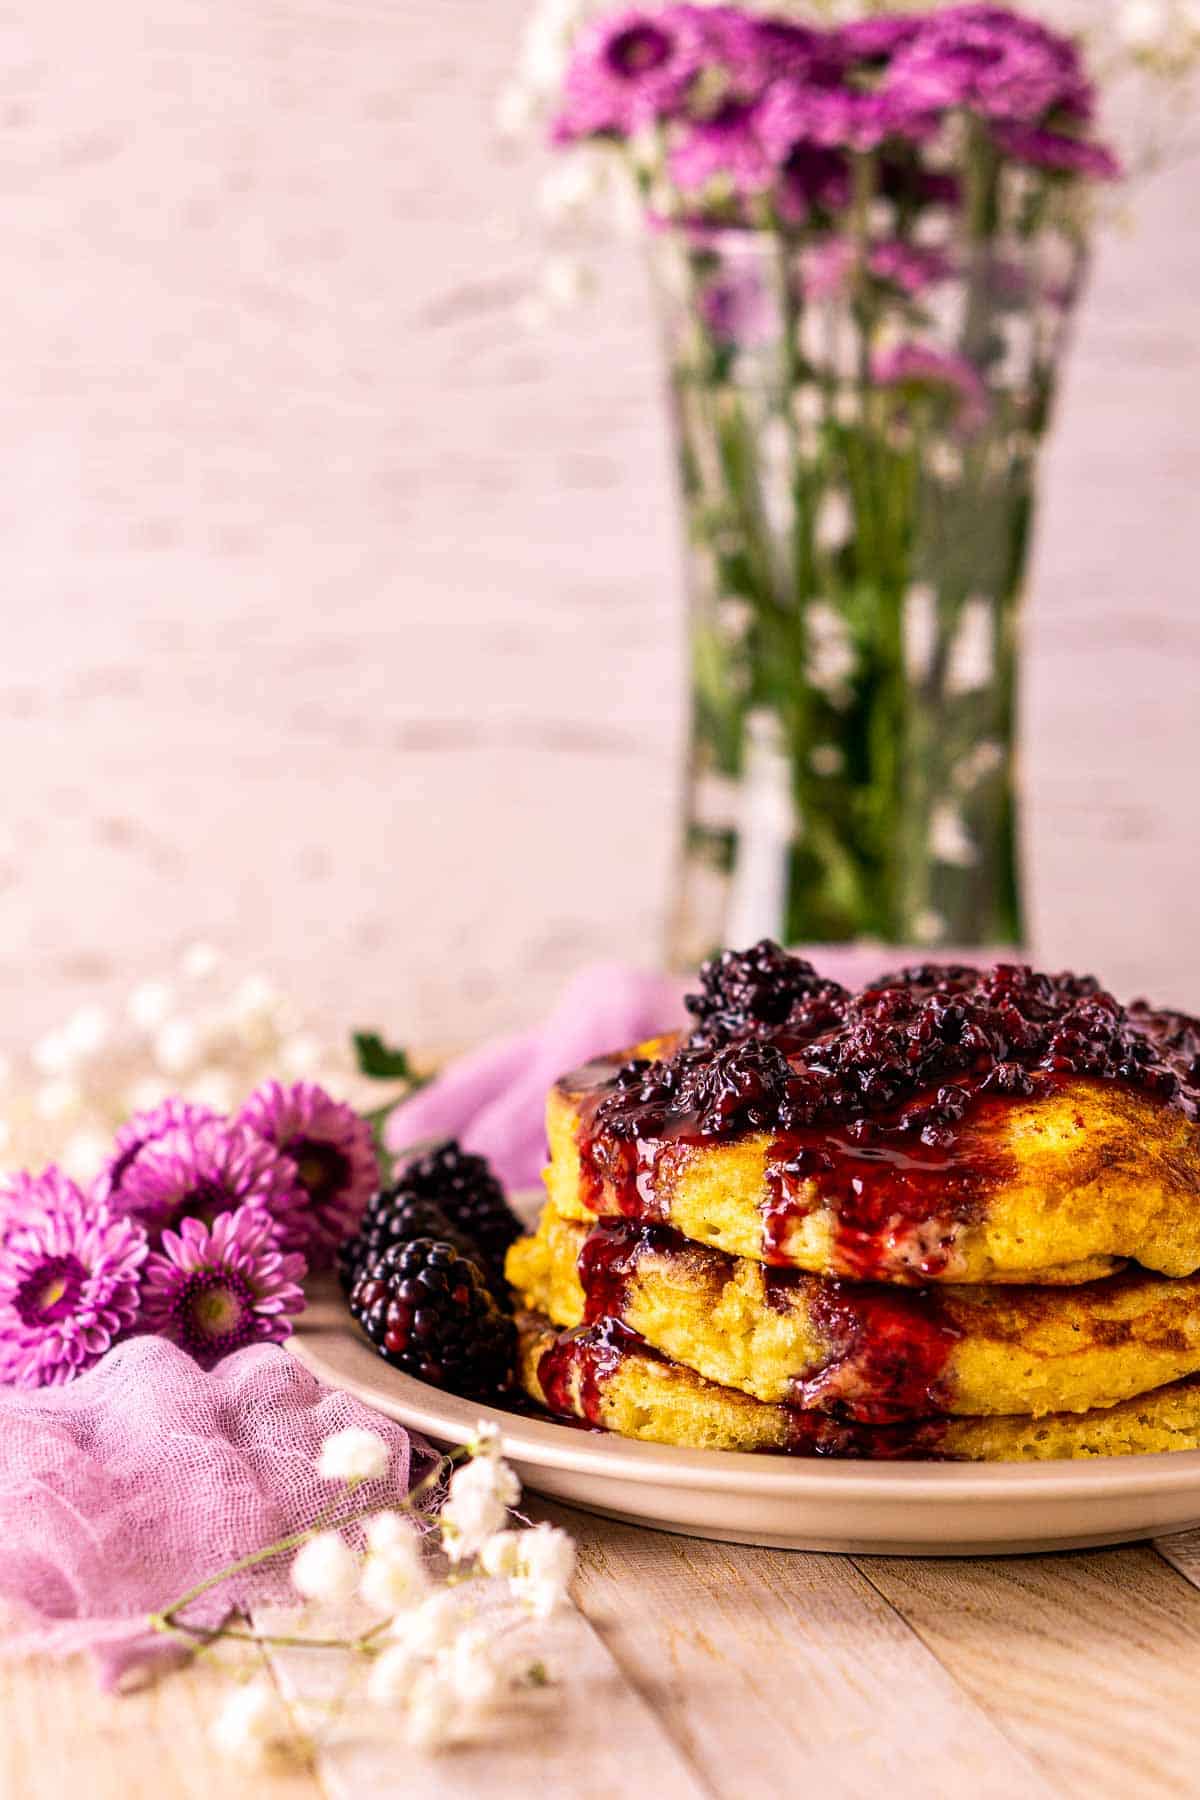 A side view of the blackberry pancakes on a cream-colored surface with purple cloth and white flowers on the left of the plate.